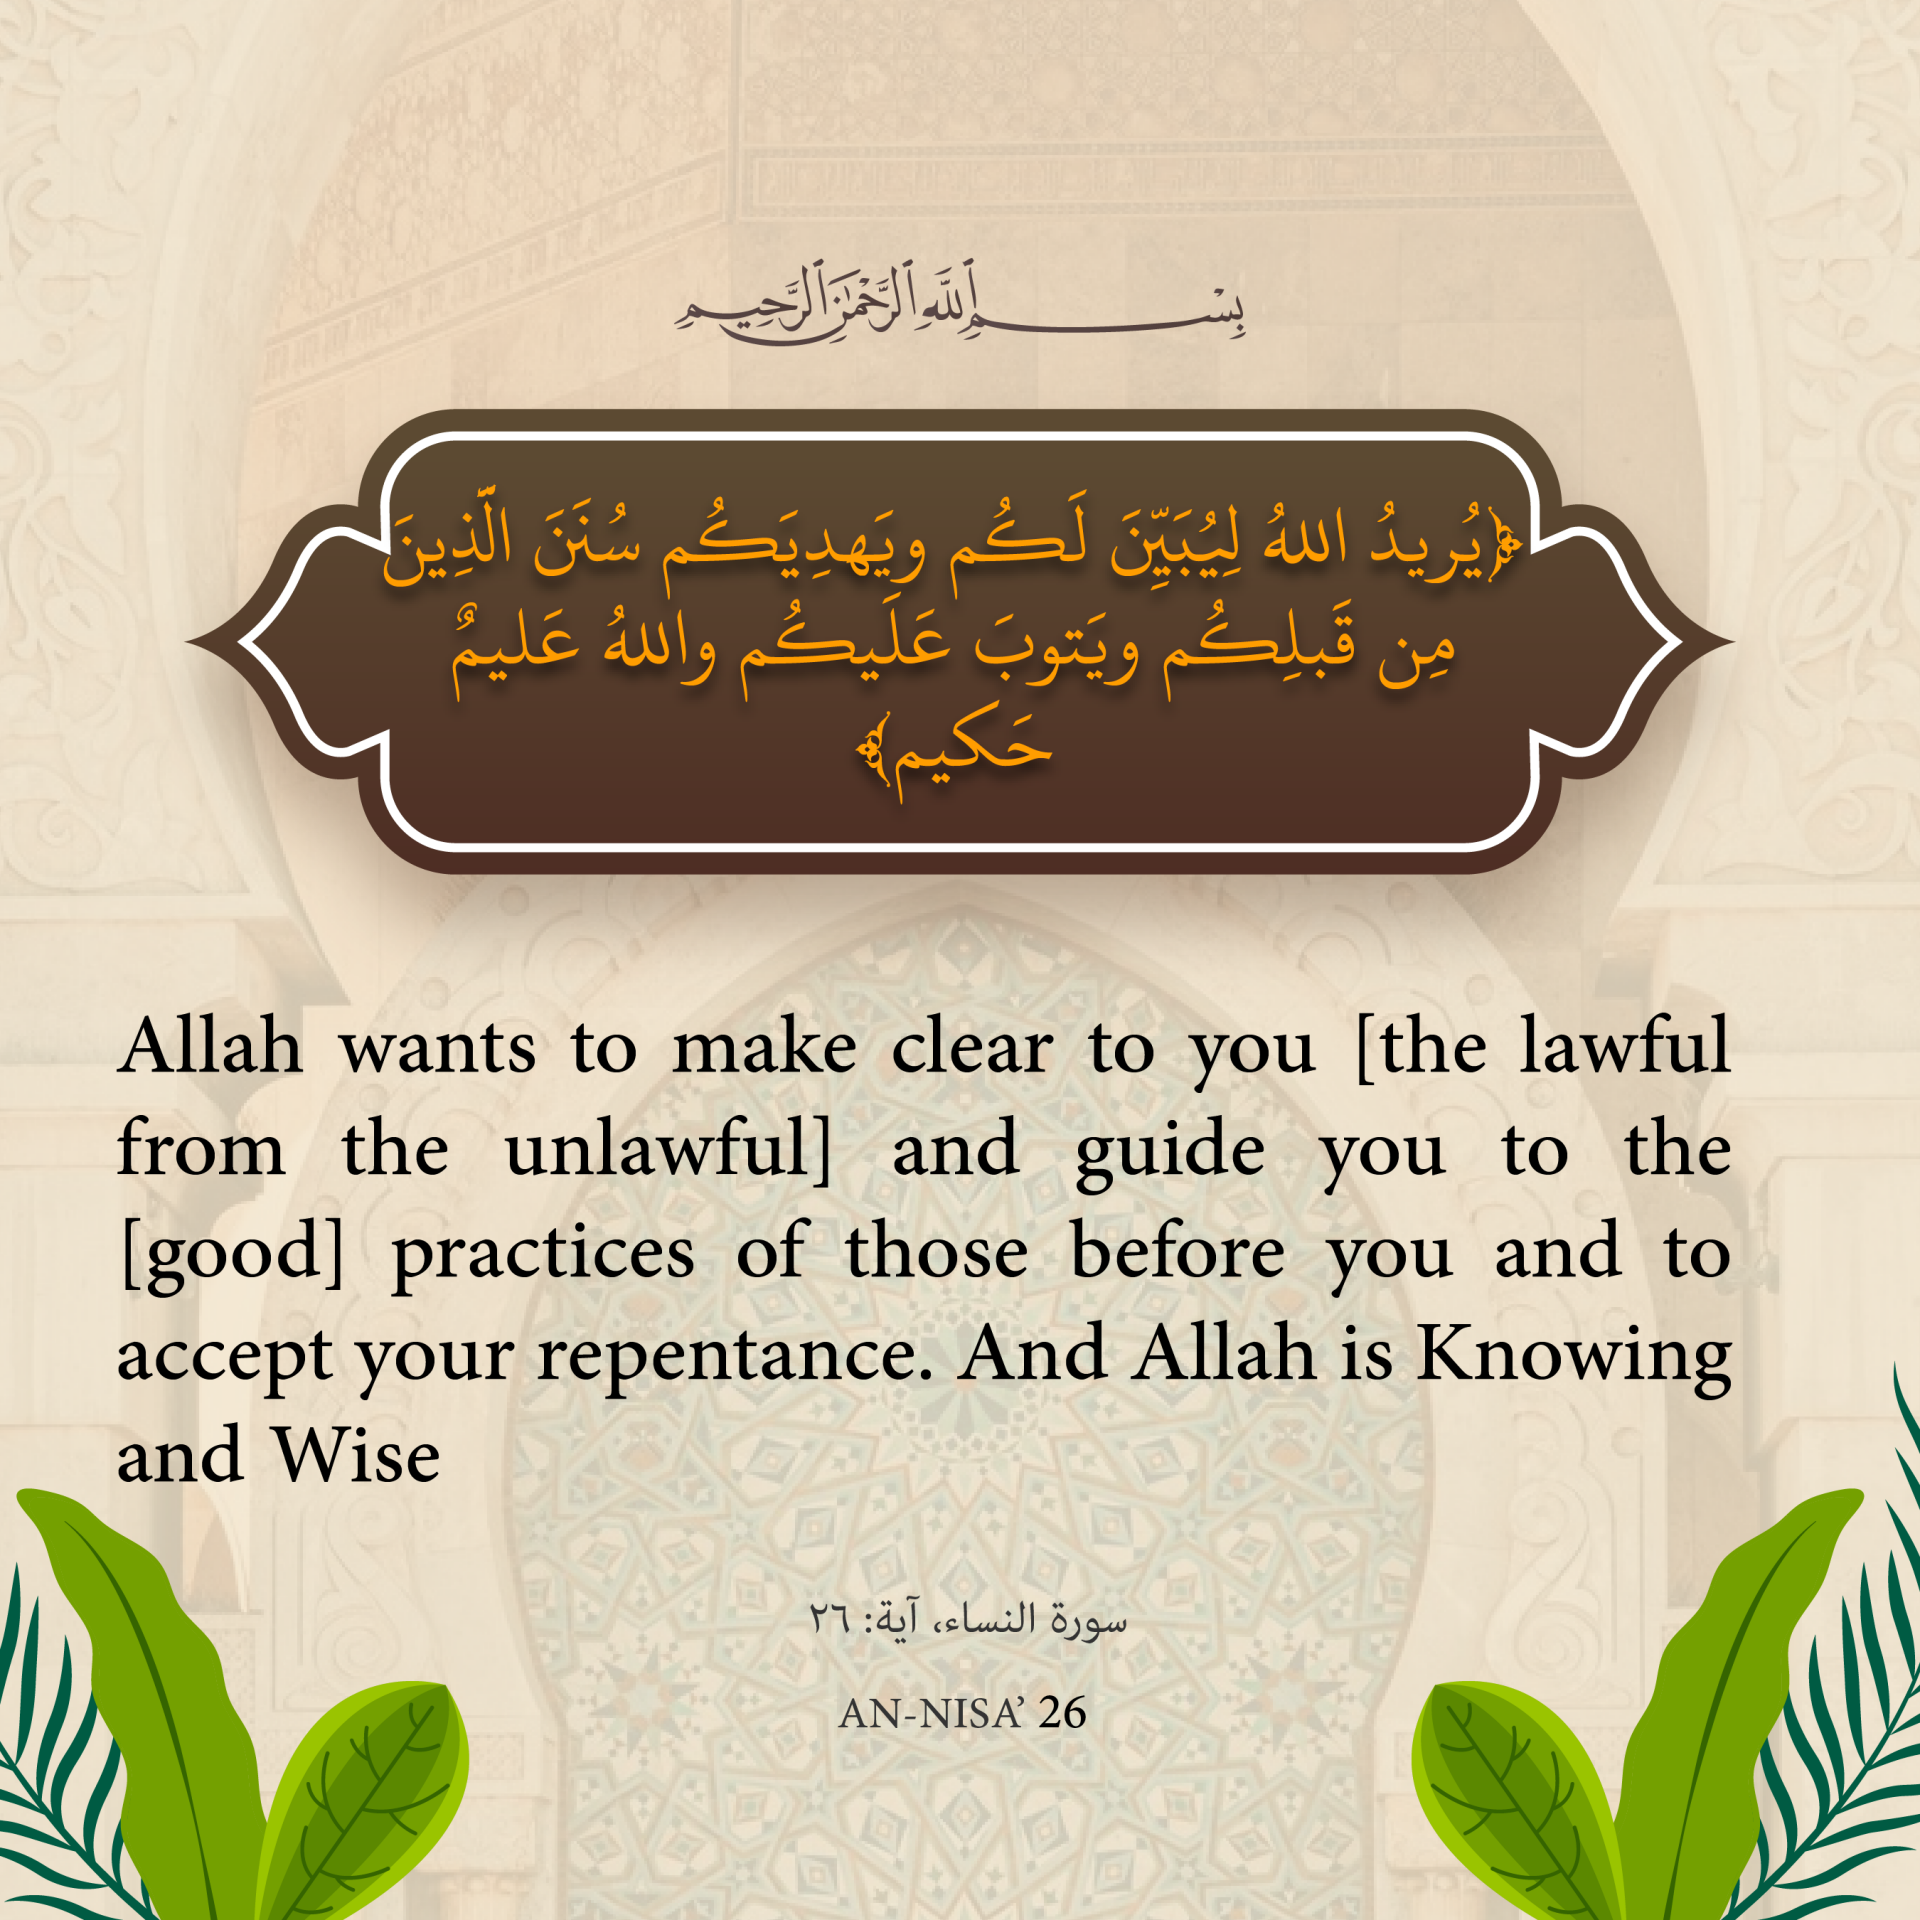 "Allah wants to make clear to you​..."